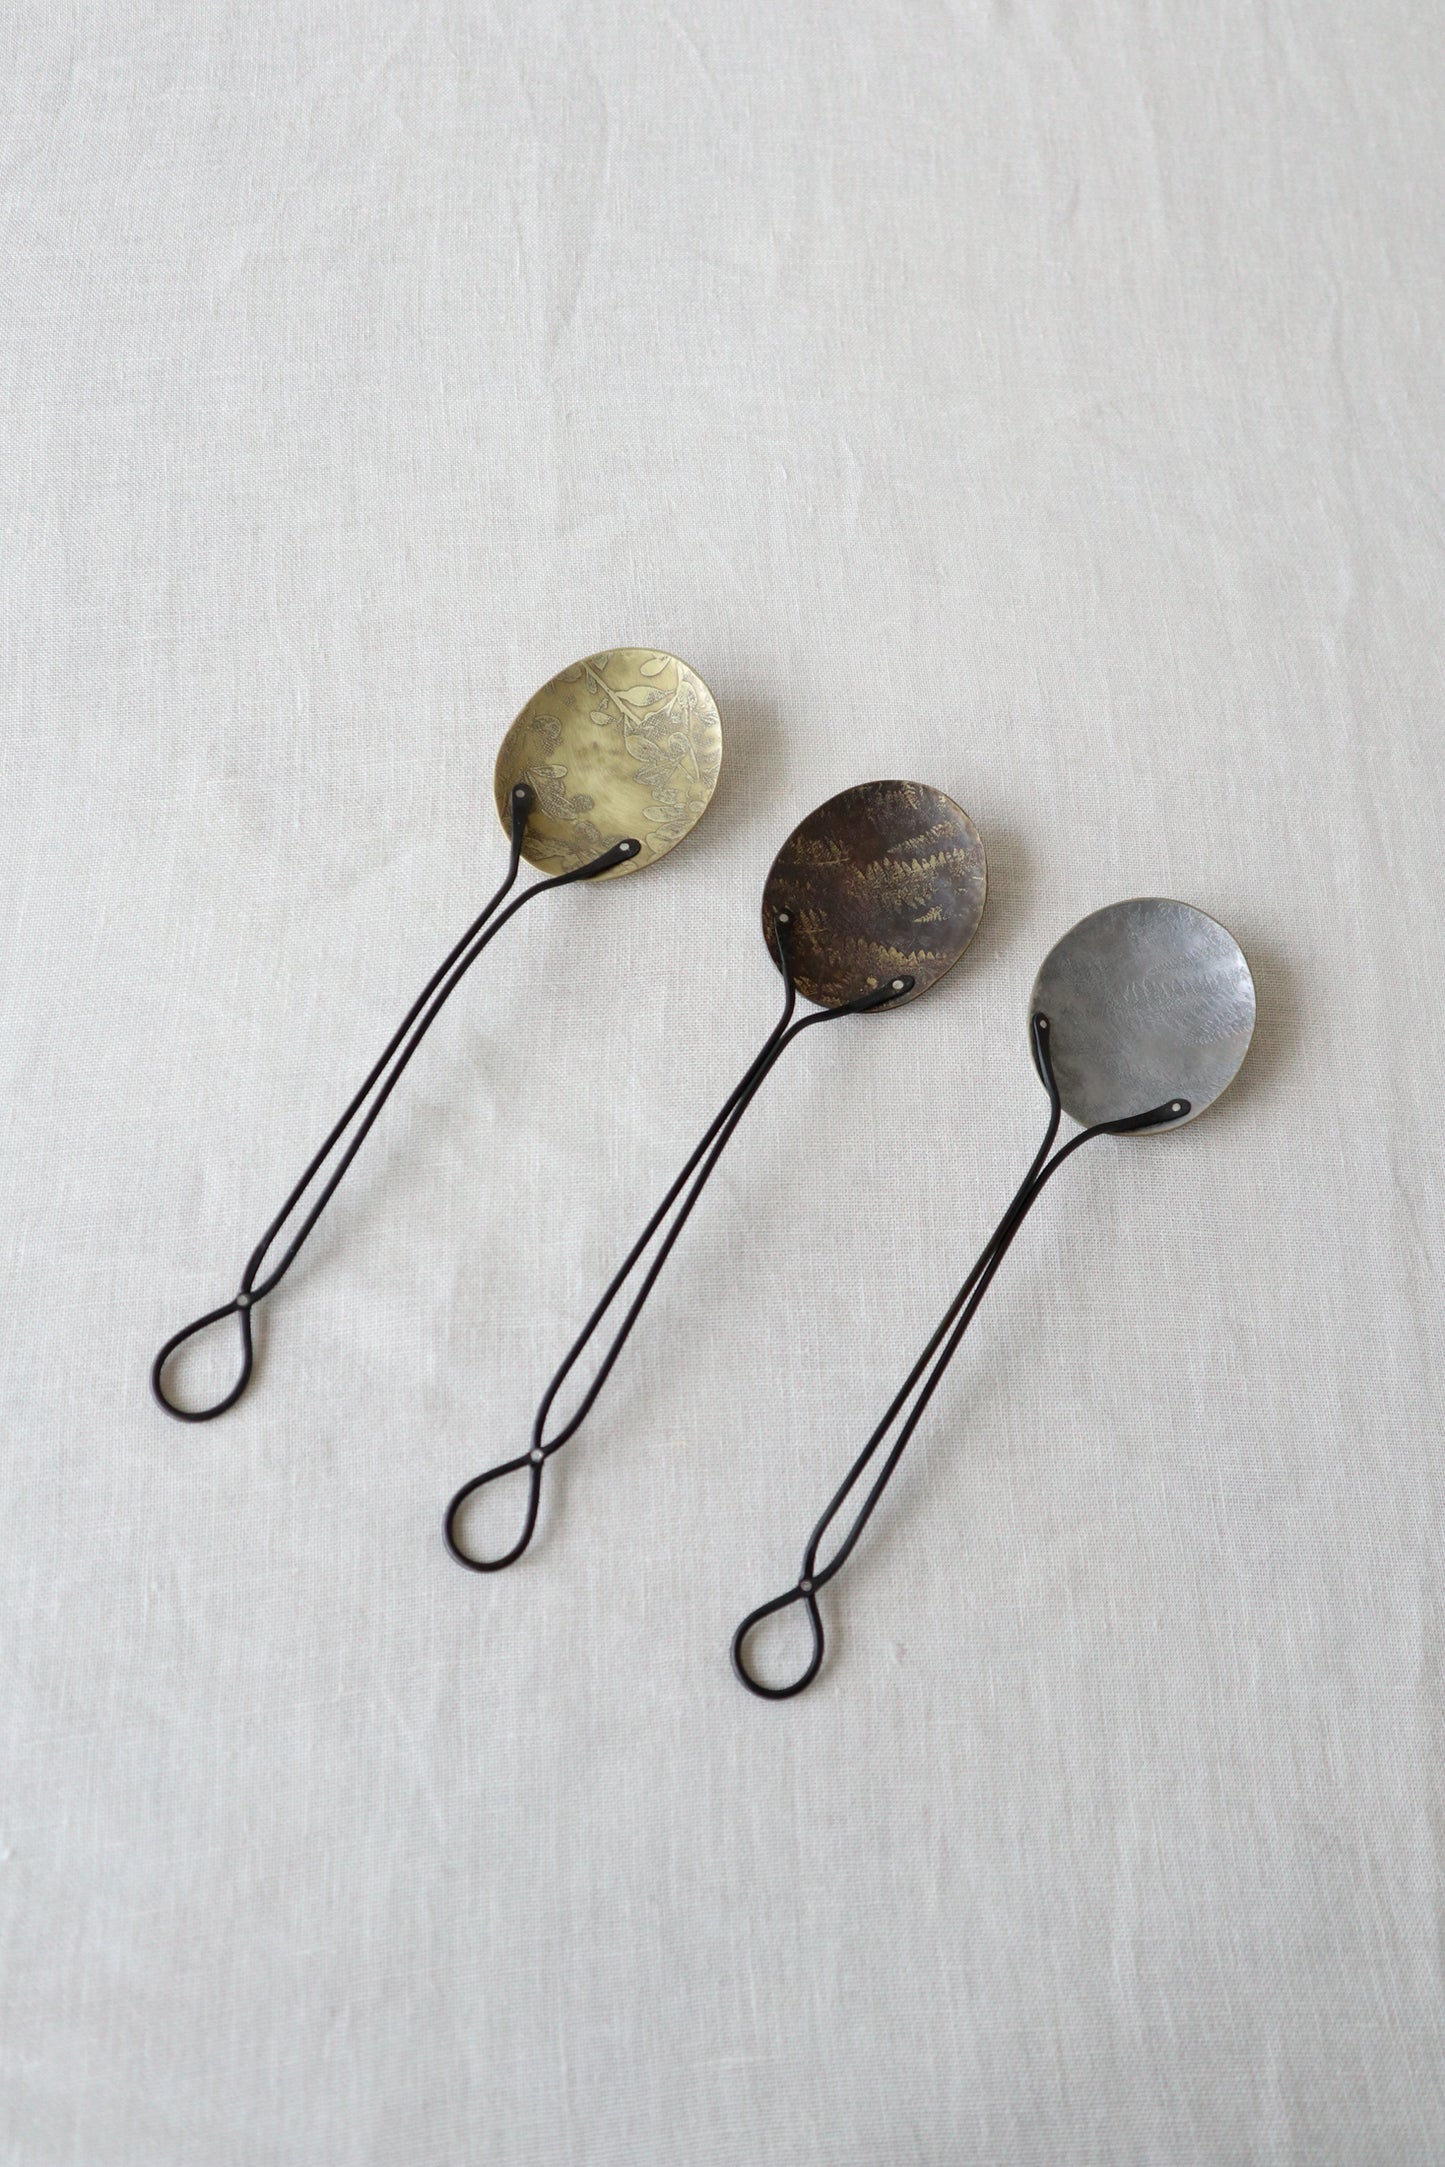 Foliage Table Spoons